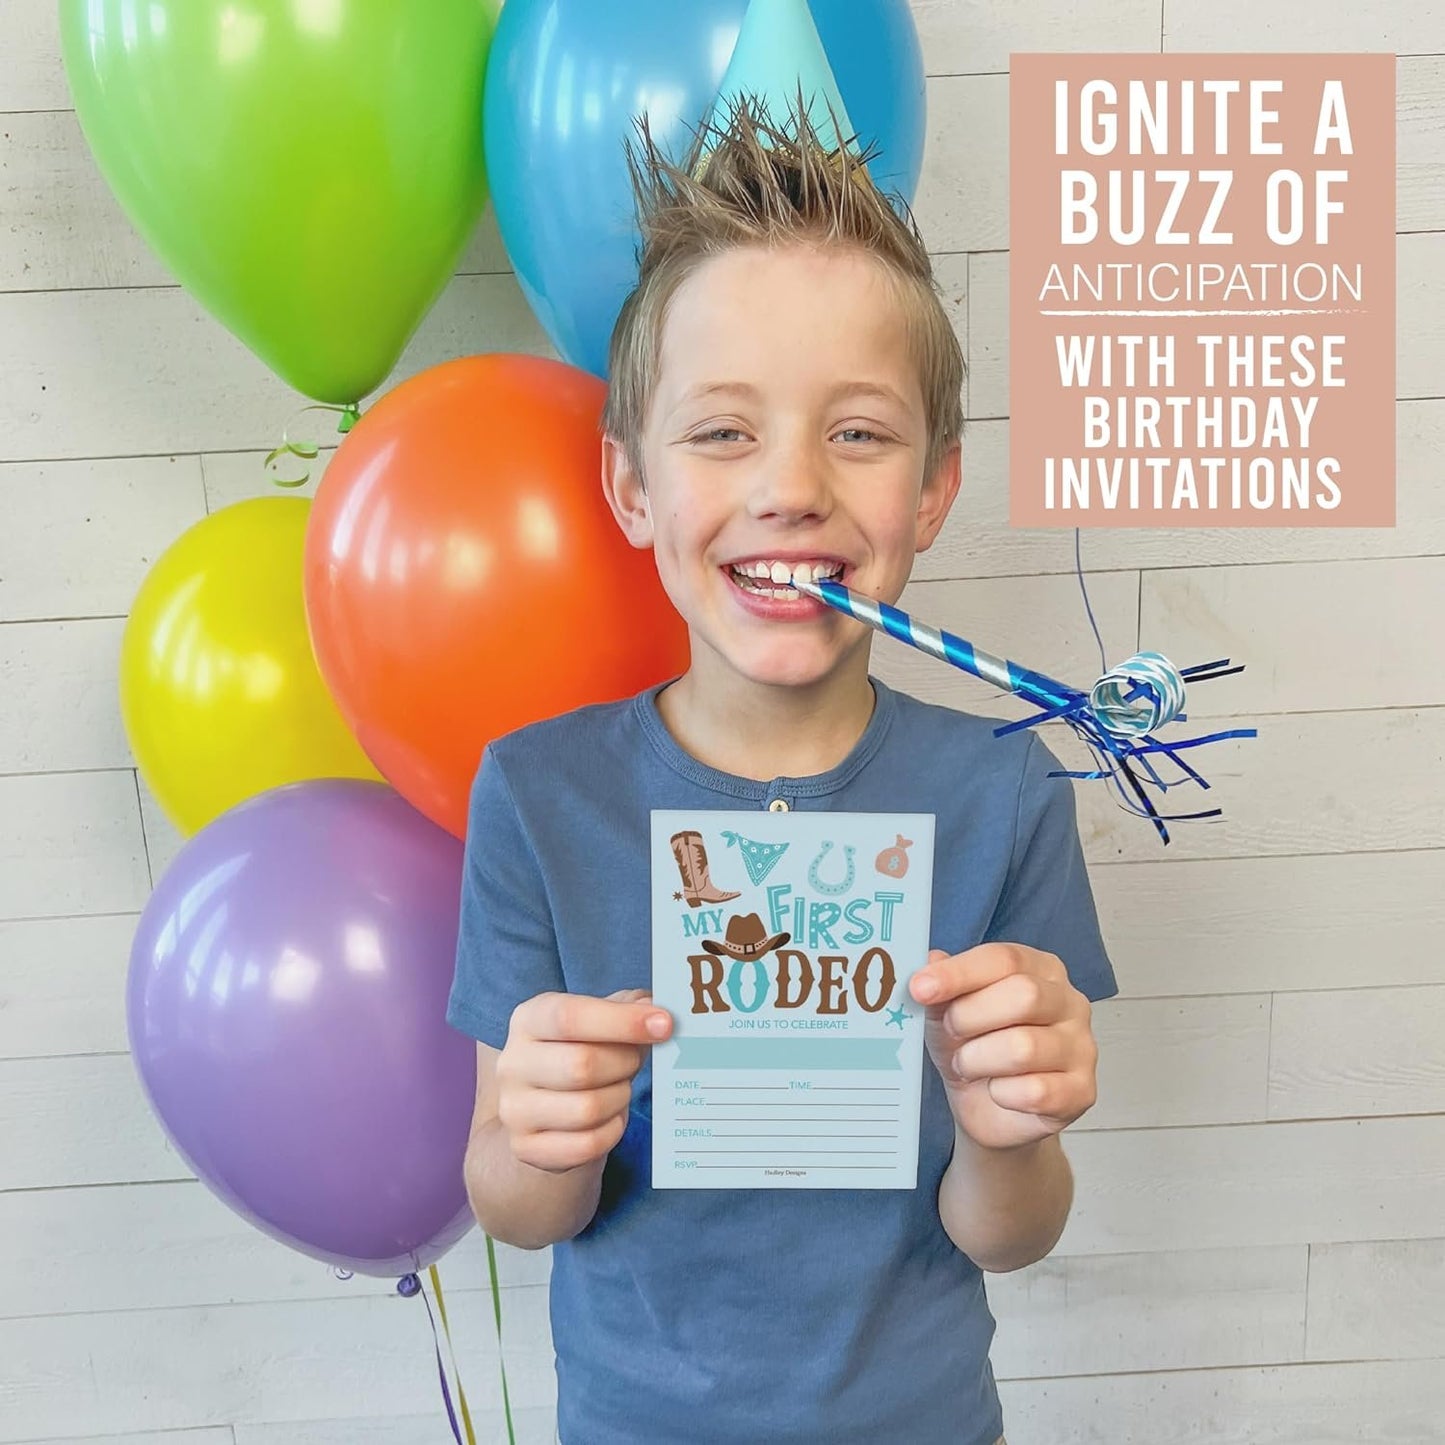 15 First Rodeo Birthday Invitations For Boys - Cowboy Birthday Invites For Boy, 1st Rodeo Birthday Party Invitations For Boys, Boy Birthday Invitations Boy, Western Invitations For Birthday Party